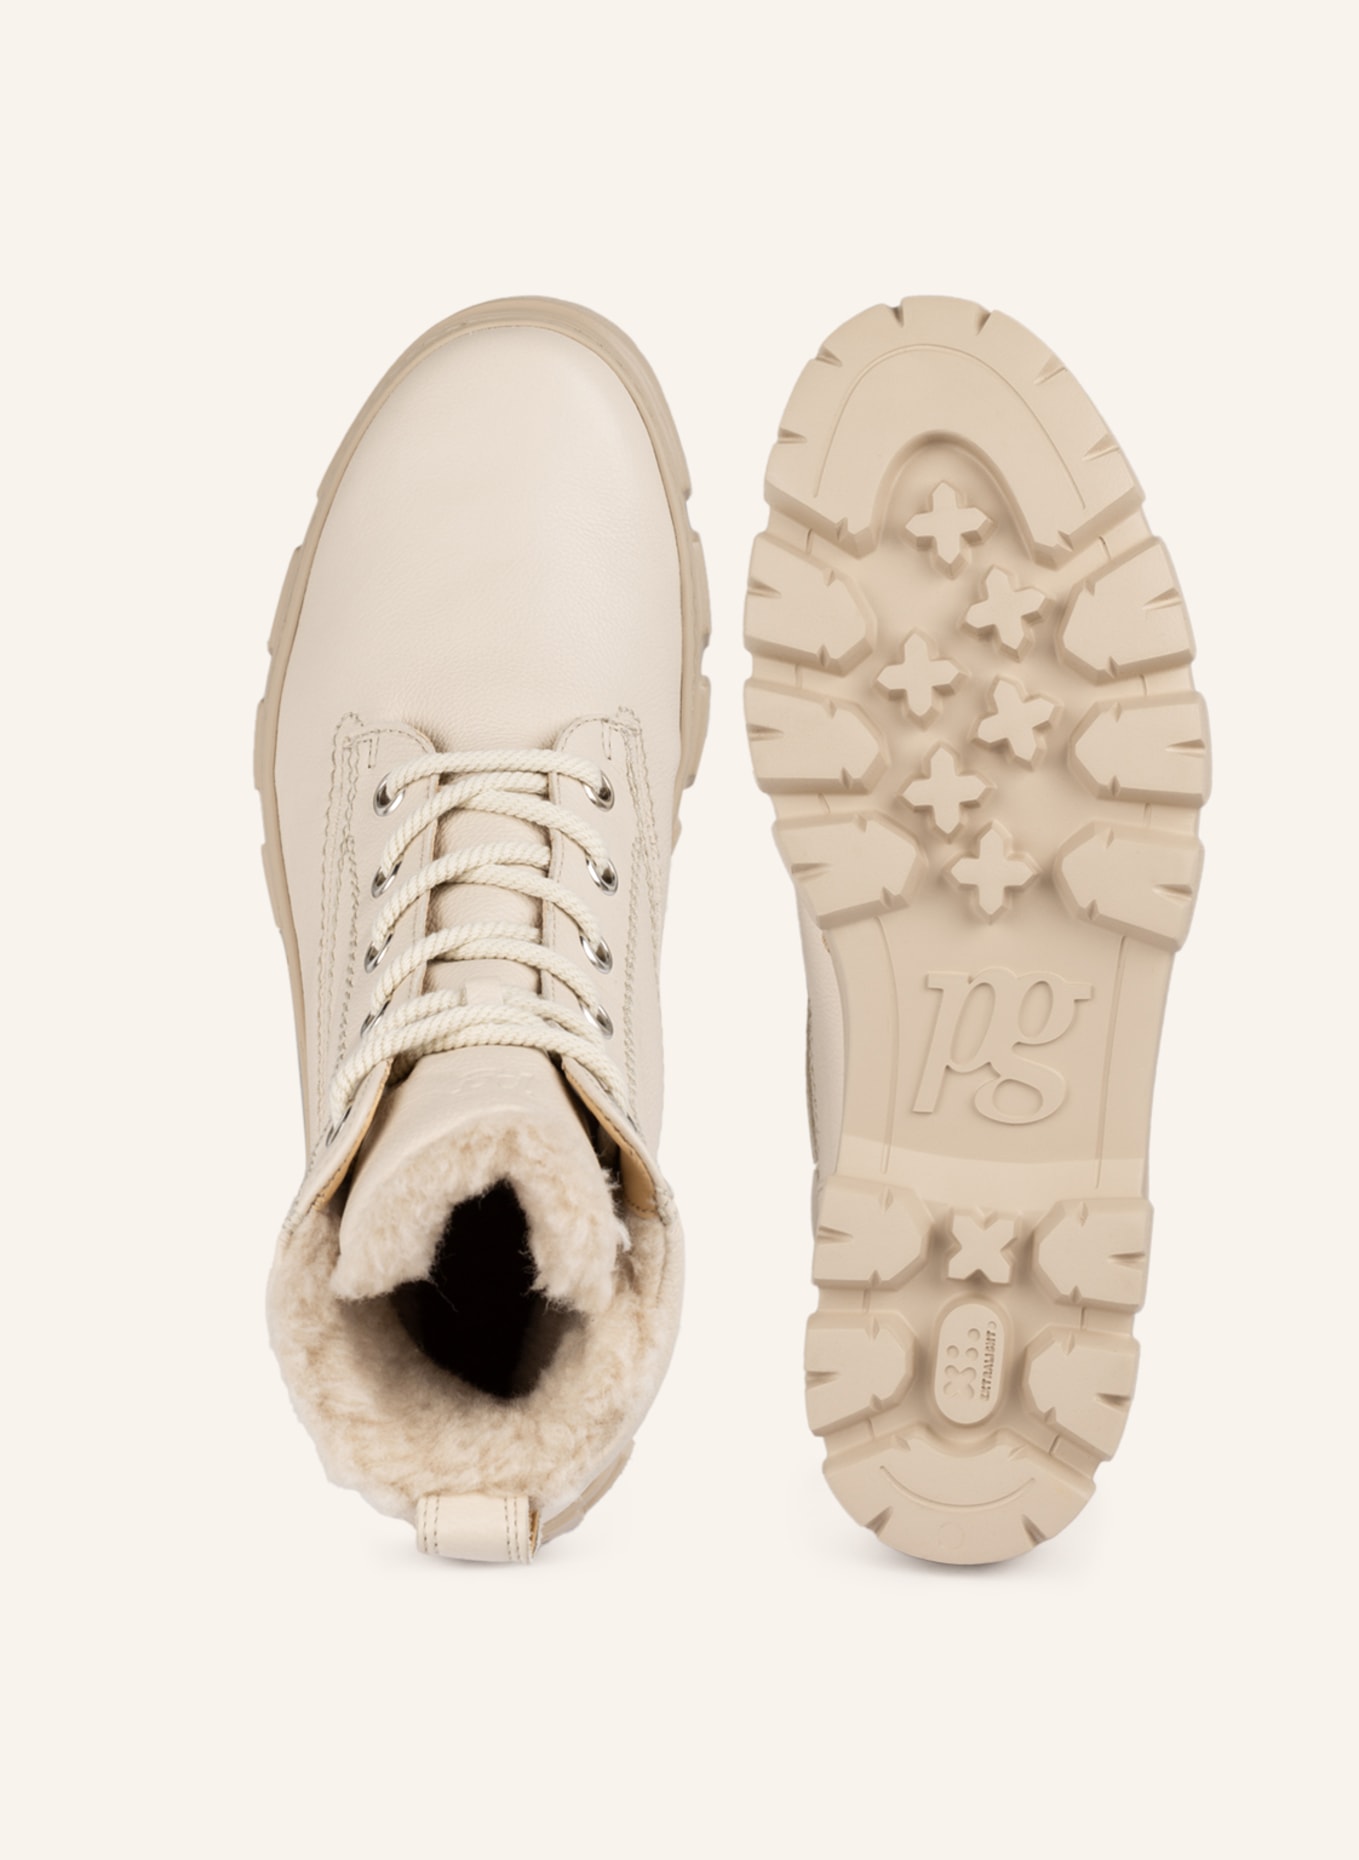 paul green Lace-up boots, Color: BEIGE (Image 5)